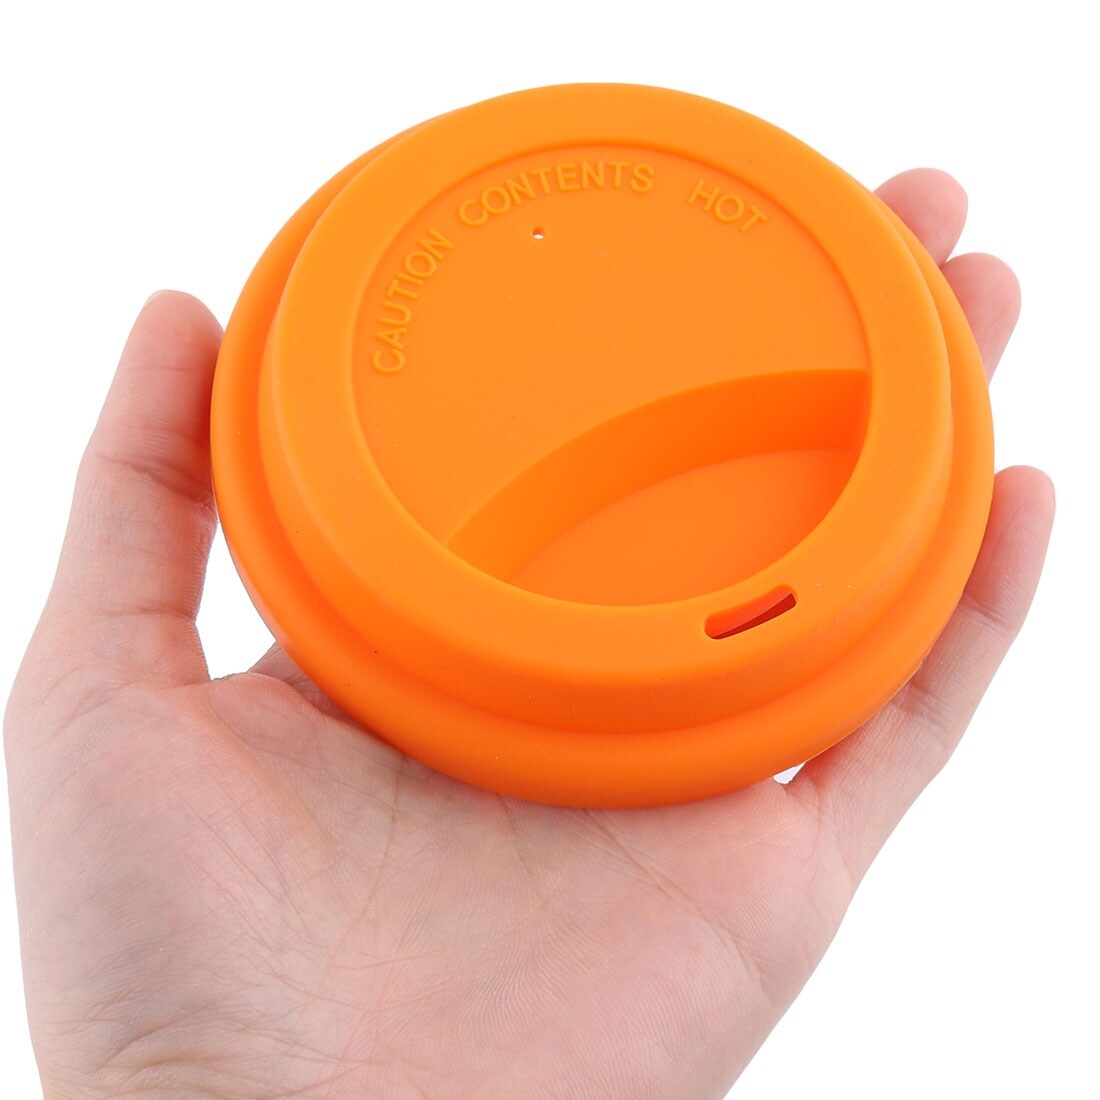 https://ak1.ostkcdn.com/images/products/is/images/direct/6178f87fb7373cd7143119f296b557fb6cdbd294/Family-Silicone-Round-Shaped-Resuable-Sealed-Mug-Lid-Tea-Coffee-Cup-Cover-Orange.jpg